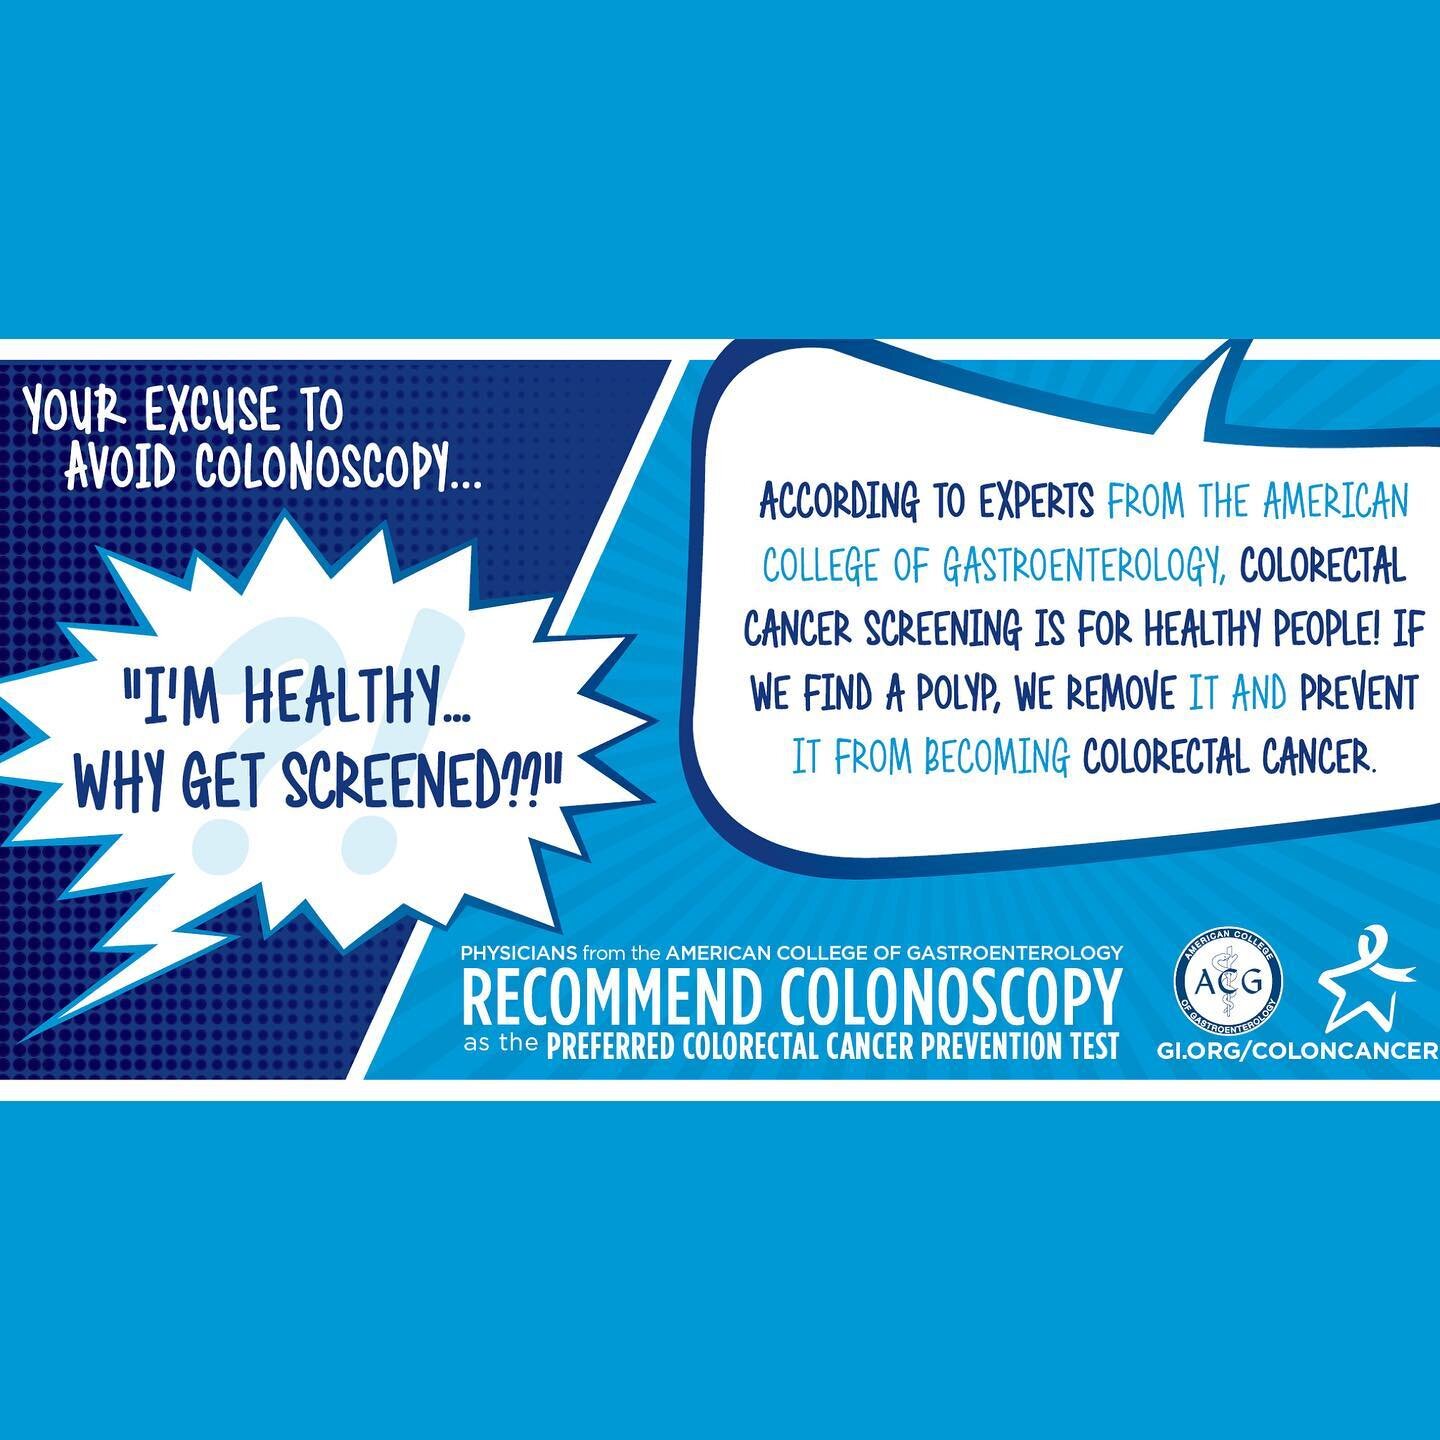 👍🏾Healthy? Feel good? So Why get screened for #ColonCancer?
🤔Because #Polyps (pre-cancerous) and the majority of Early stage colon cancers present with NO symptoms !
💥
BUT! The good news is that polyps can be removed at the same colonoscopy they 